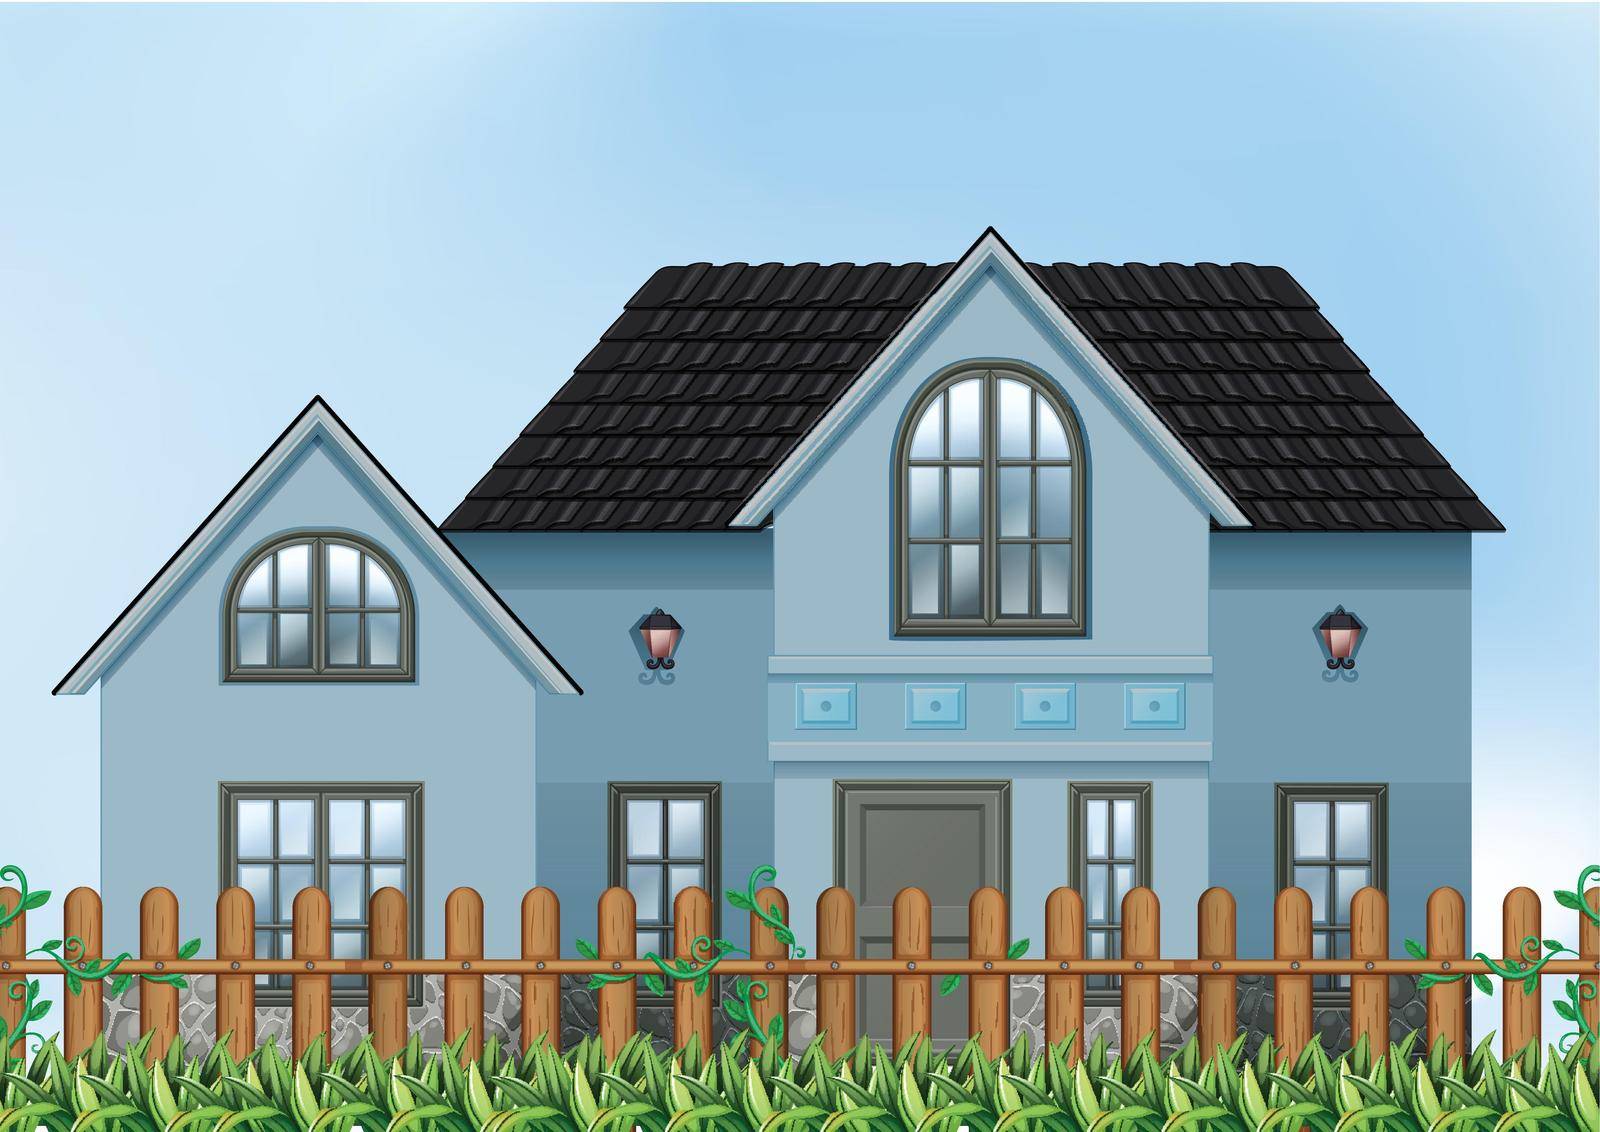 Illustration of a single detached house